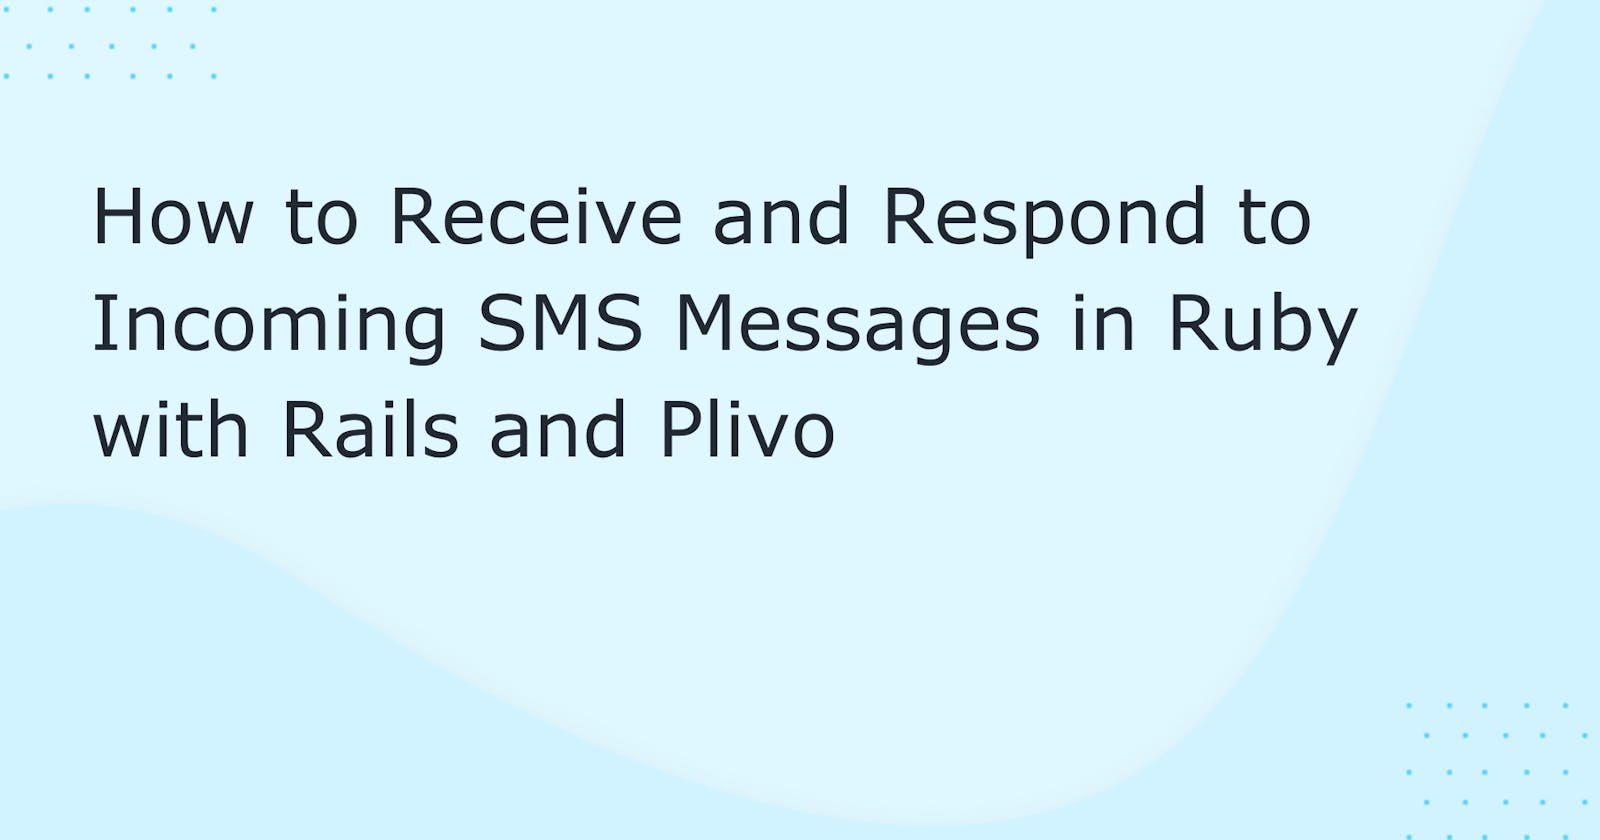 How to Receive and Respond to Incoming SMS Messages in Ruby with Rails and Plivo